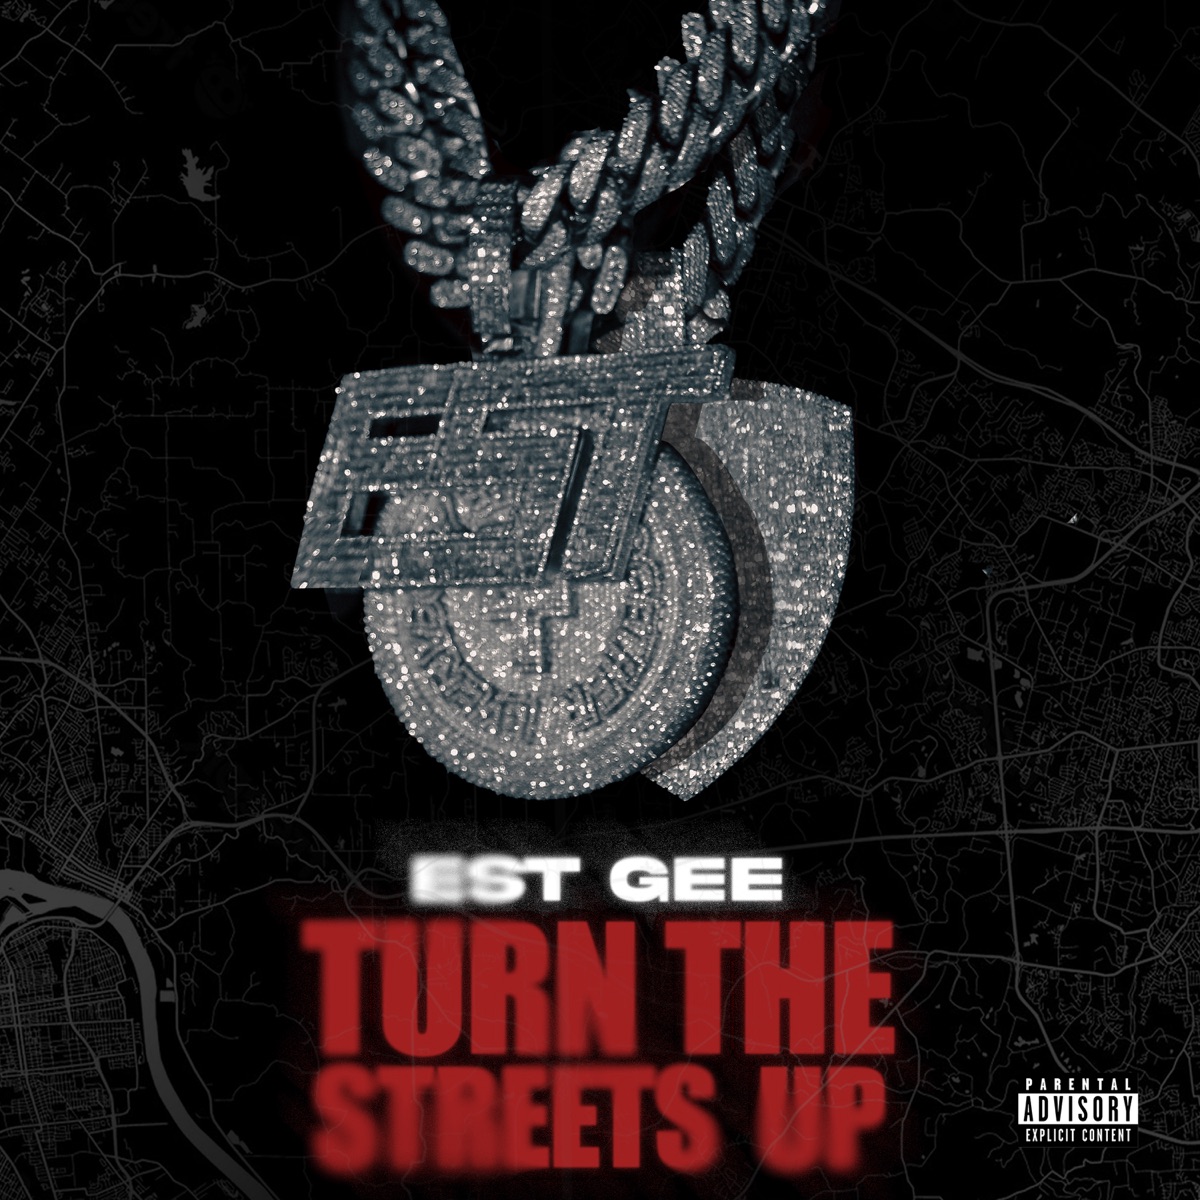 EST Gee comes with video for the "Turn The Streets Up" track » MPmania